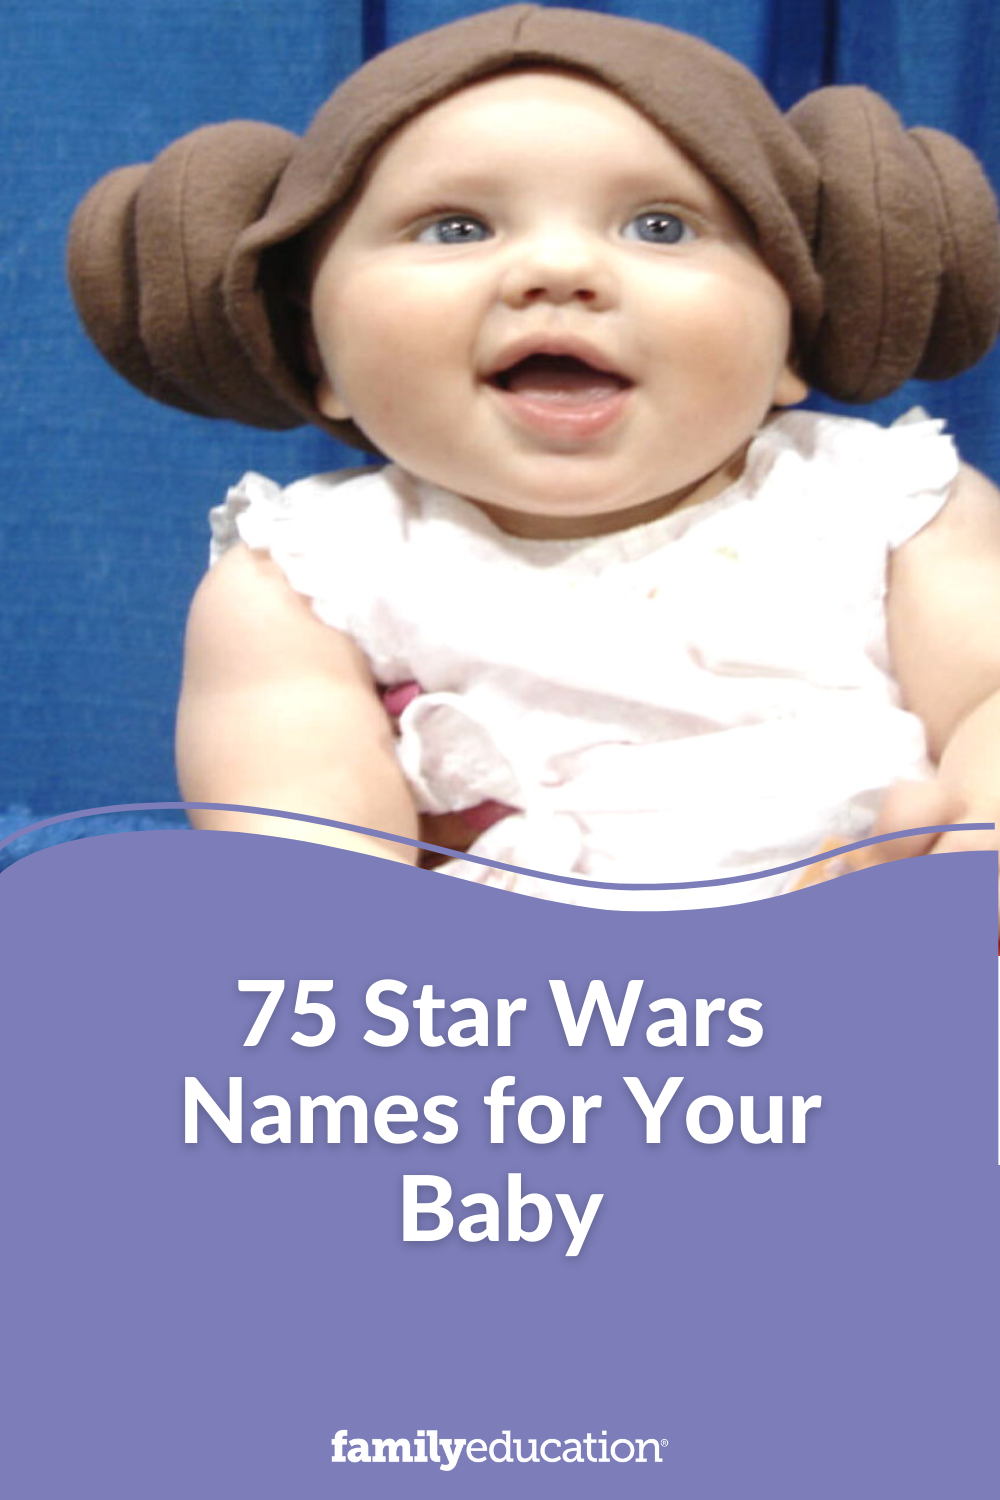 75 Star Wars Names for Your Baby Jedi - FamilyEducation